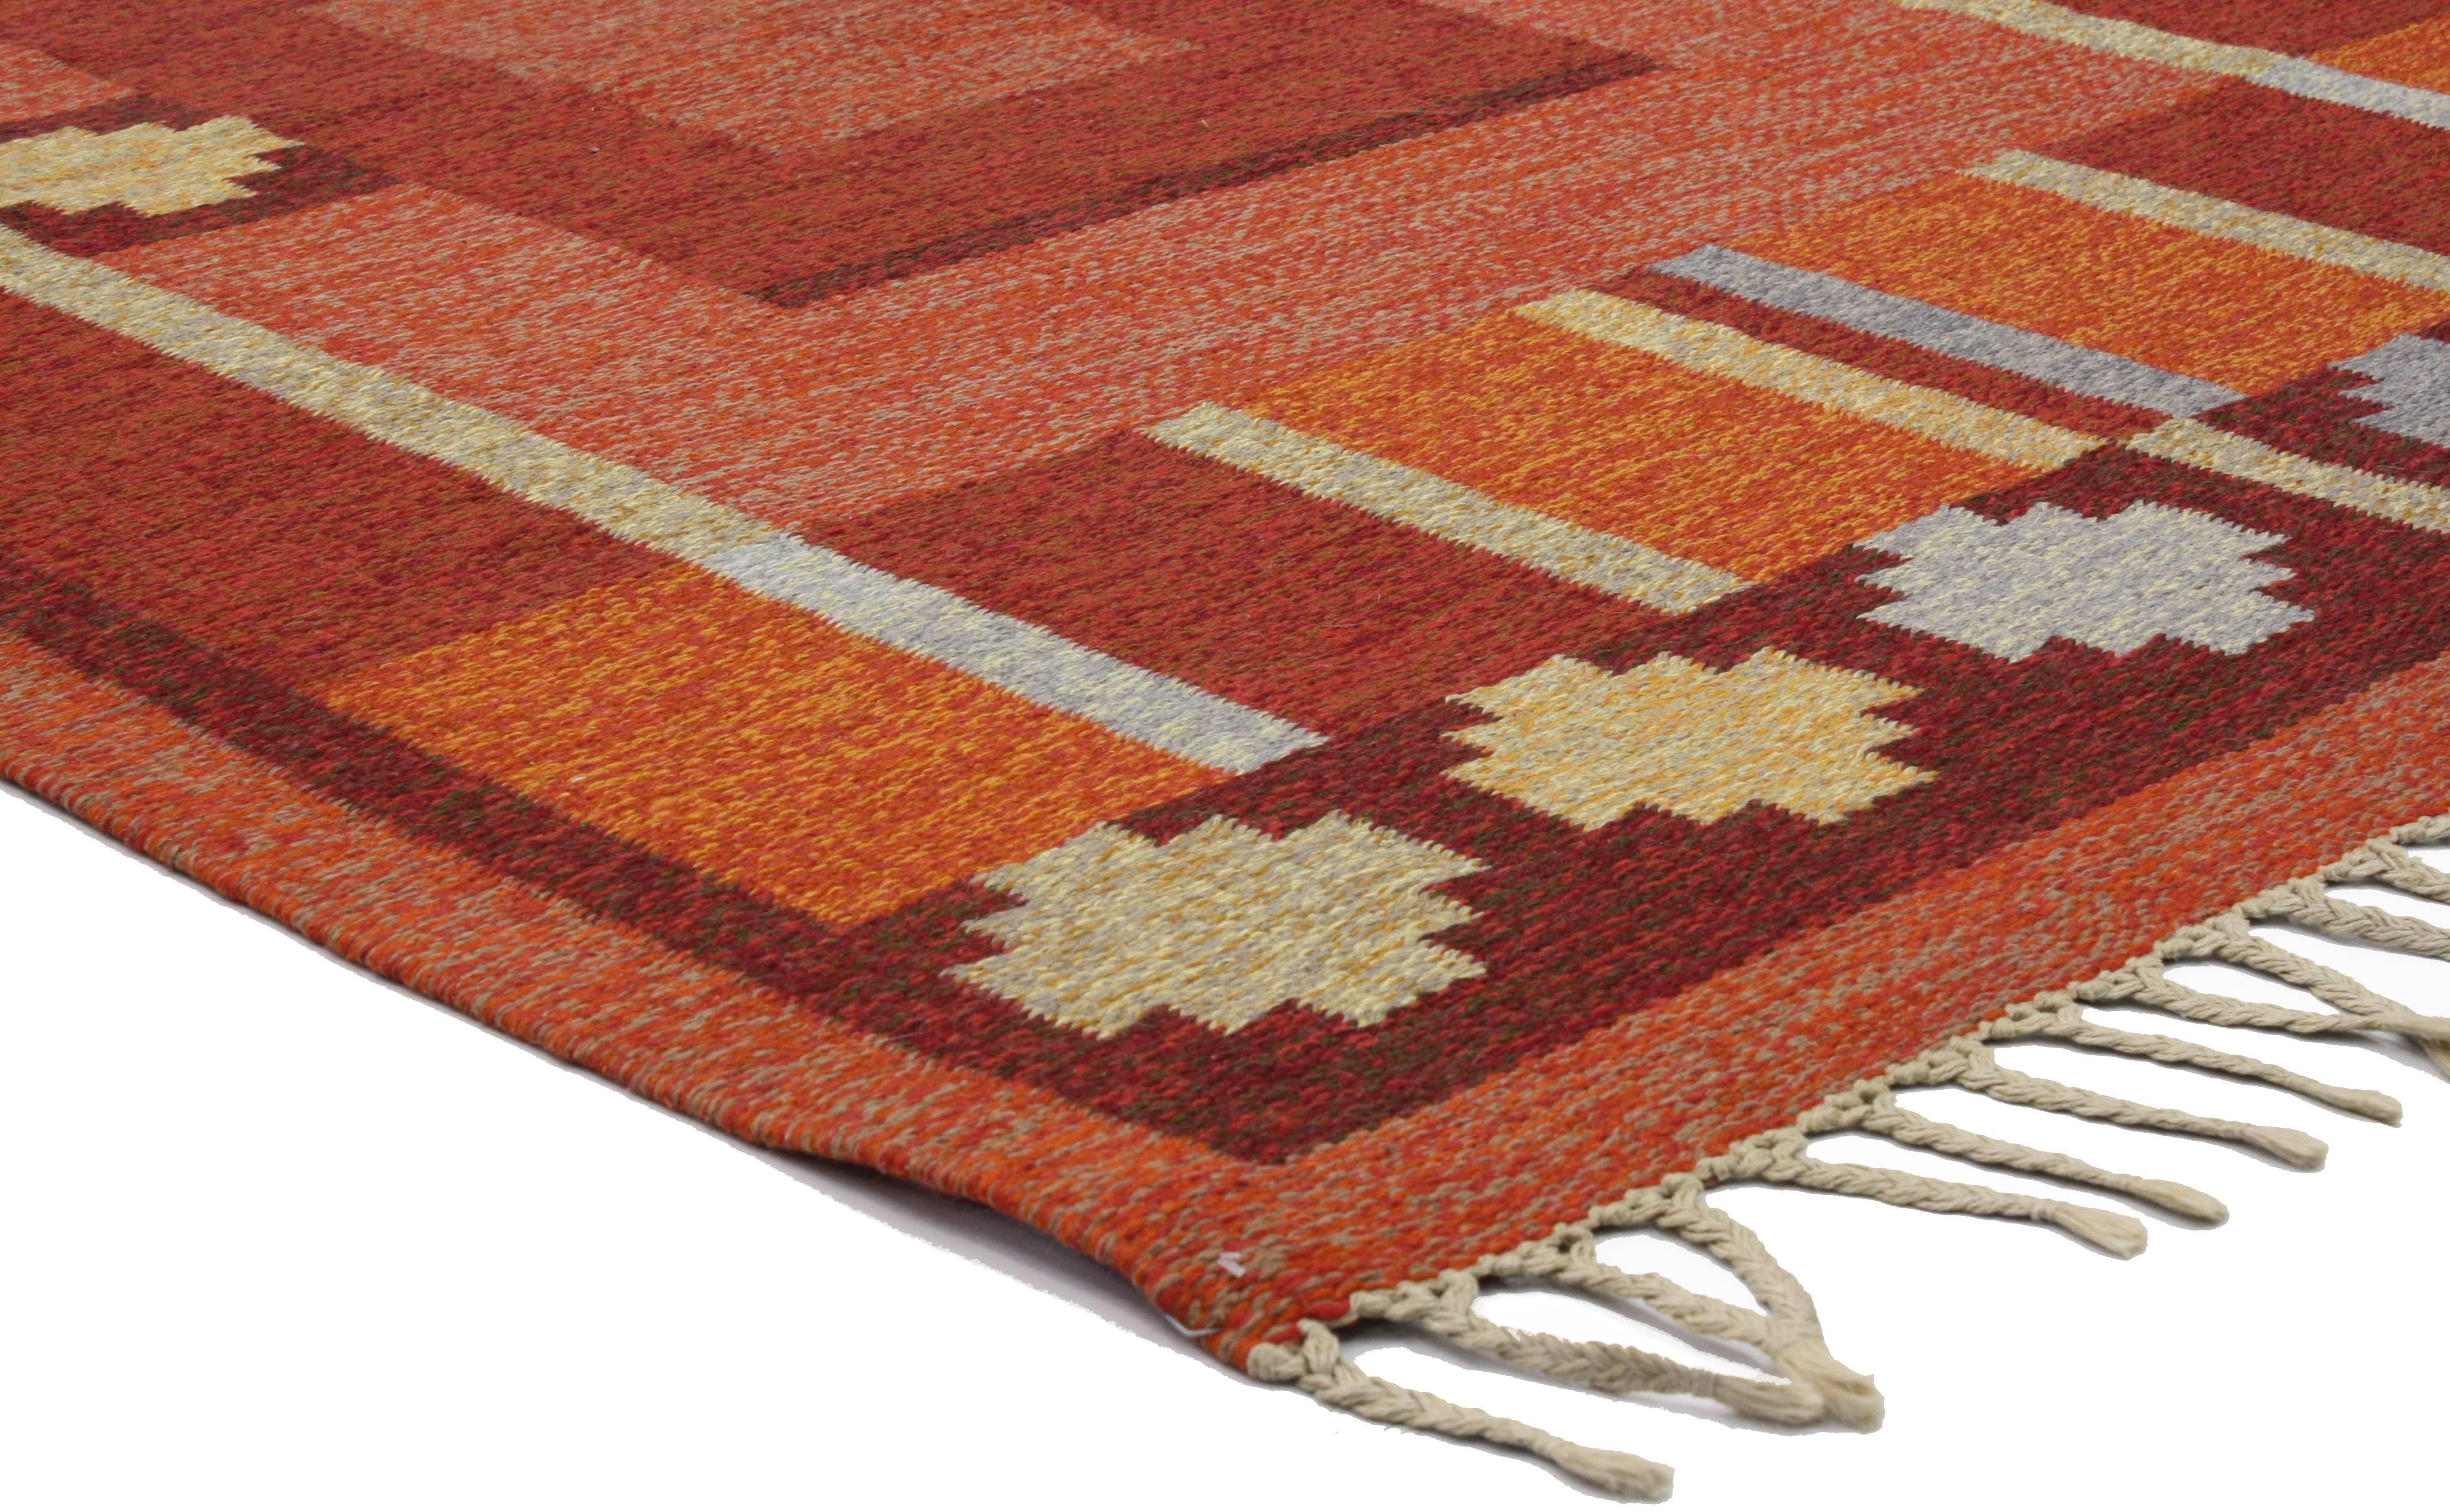 Hand-Woven Vintage Swedish Kilim Rug with Scandinavian Modern Style by Kerstin Persson  For Sale